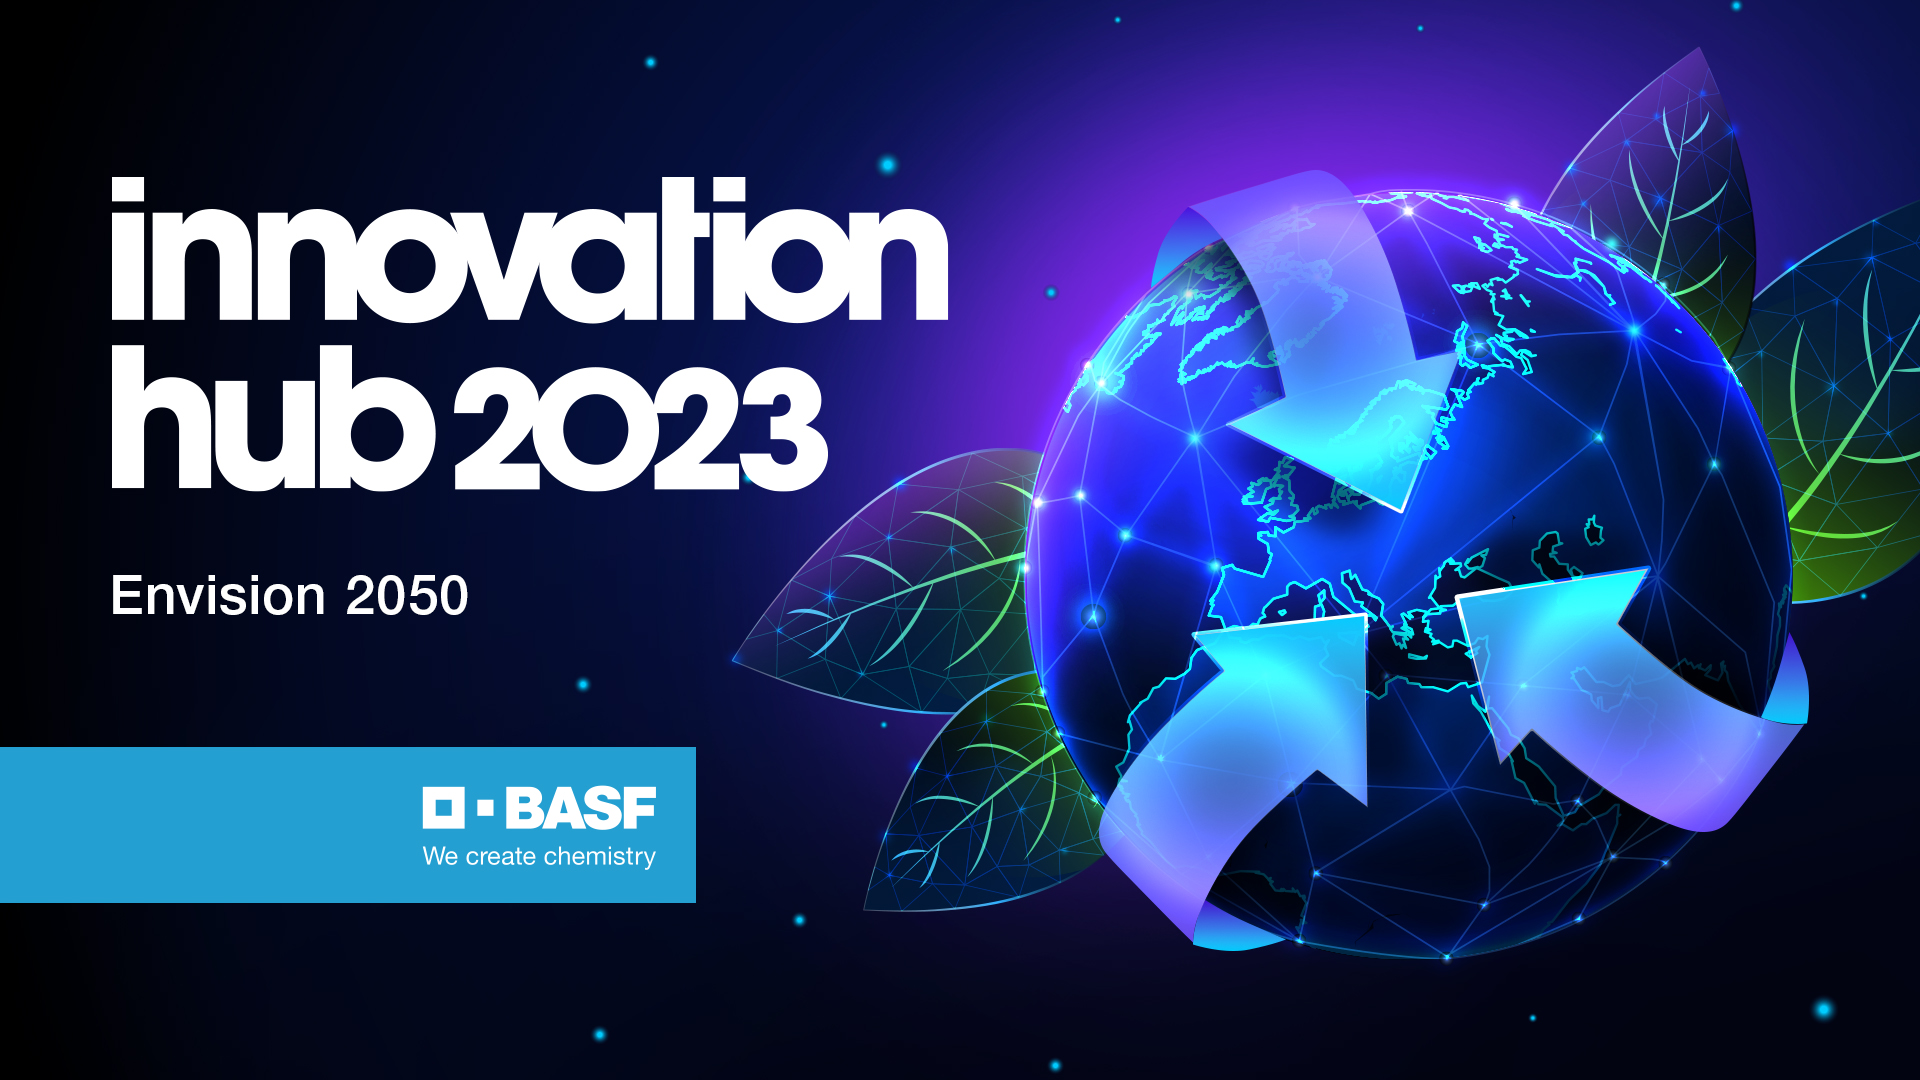 BASF and AHK România announce a new opportunity for all innovators and startups from Romania: BASF Innovation Hub 2023 extends its application deadline